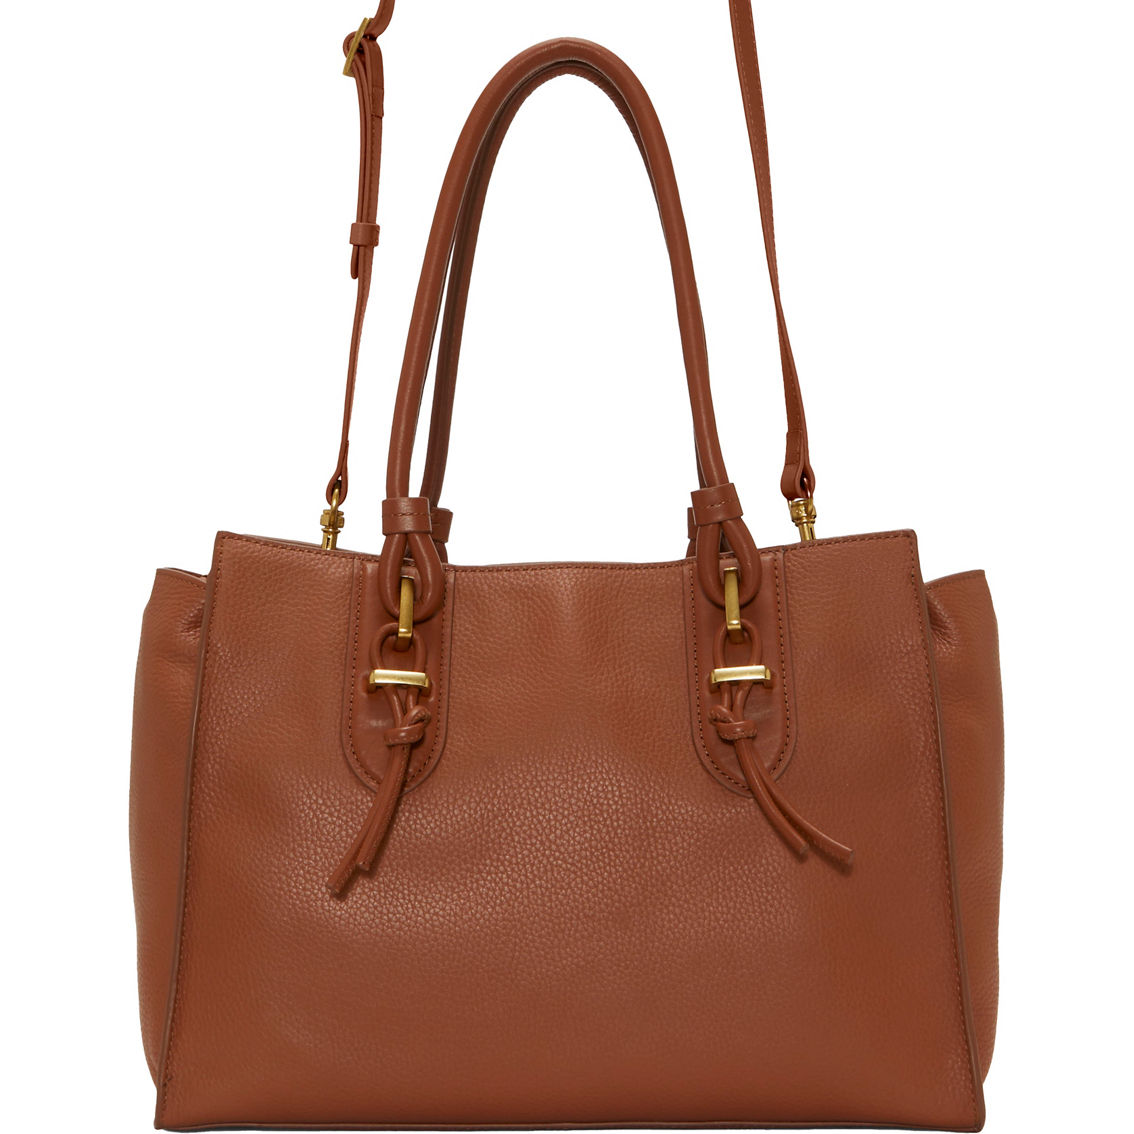 Vince Camuto Maecy Tote - Image 3 of 5